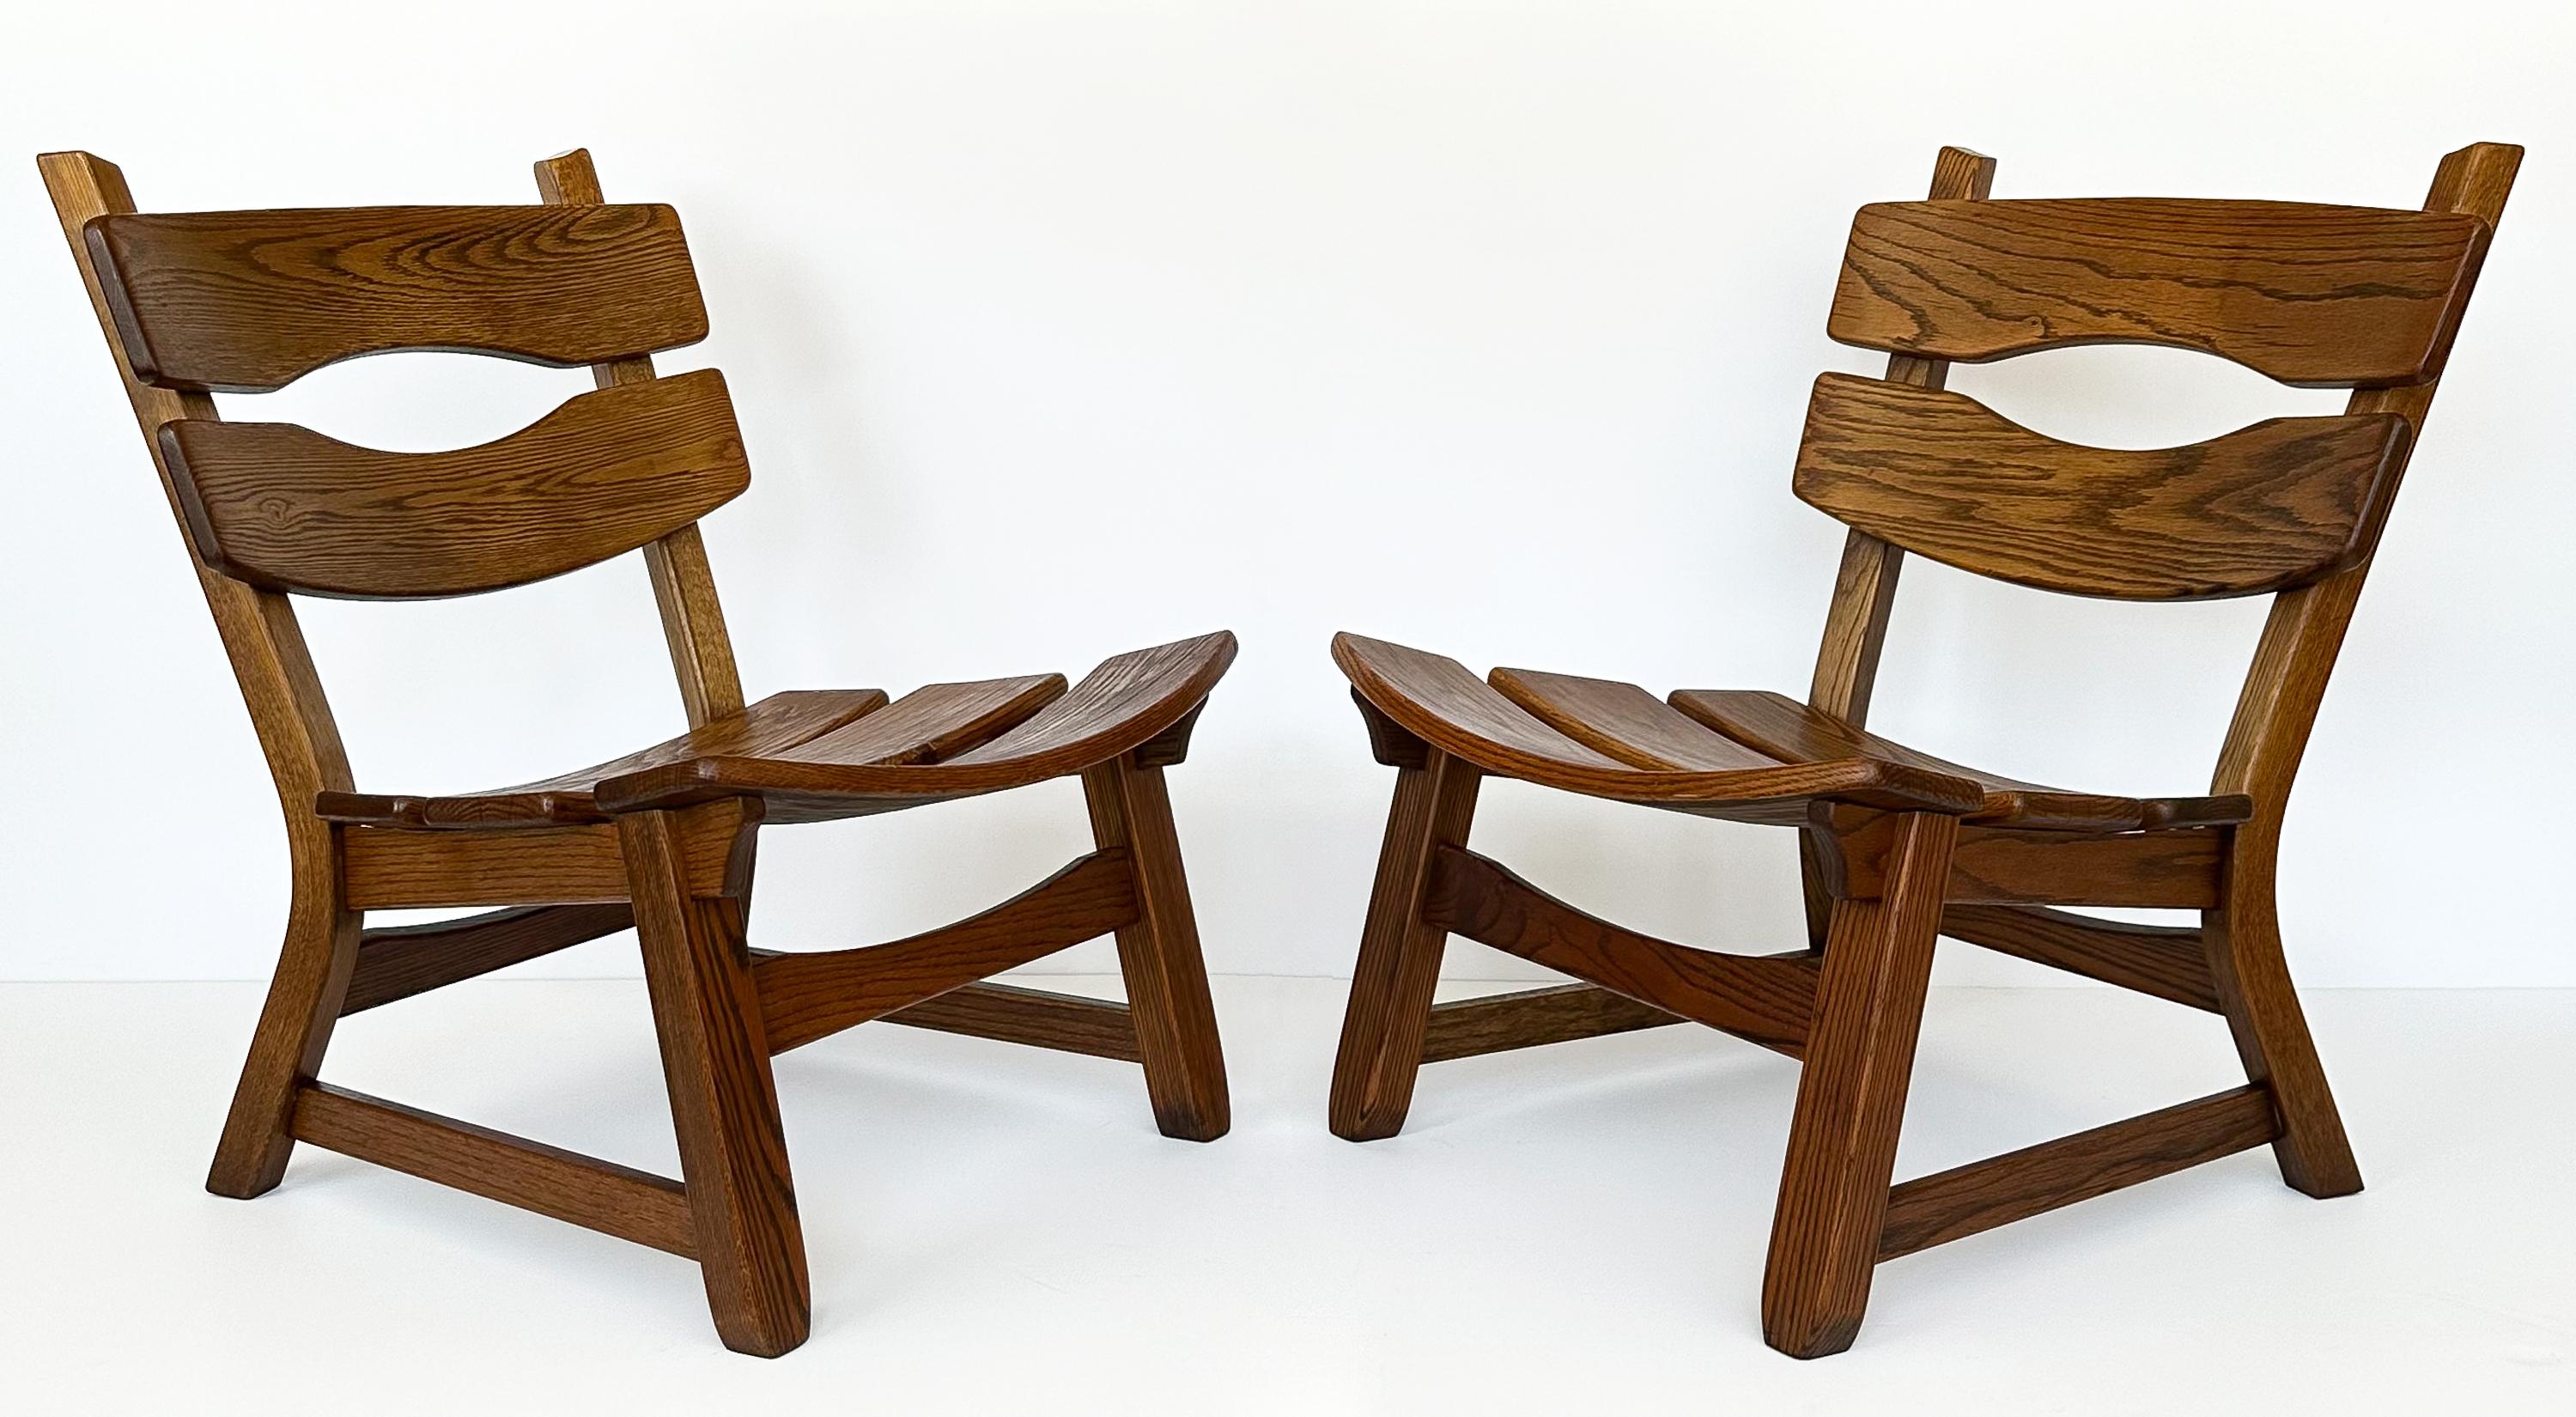 Embrace the bold character of the 1970s with this stunning pair of rustic modernist solid oak lounge chairs by Dittmann & Co for AWA Radboud, hailing from the Netherlands. These armless lounge chairs are substantial in presence, crafted entirely